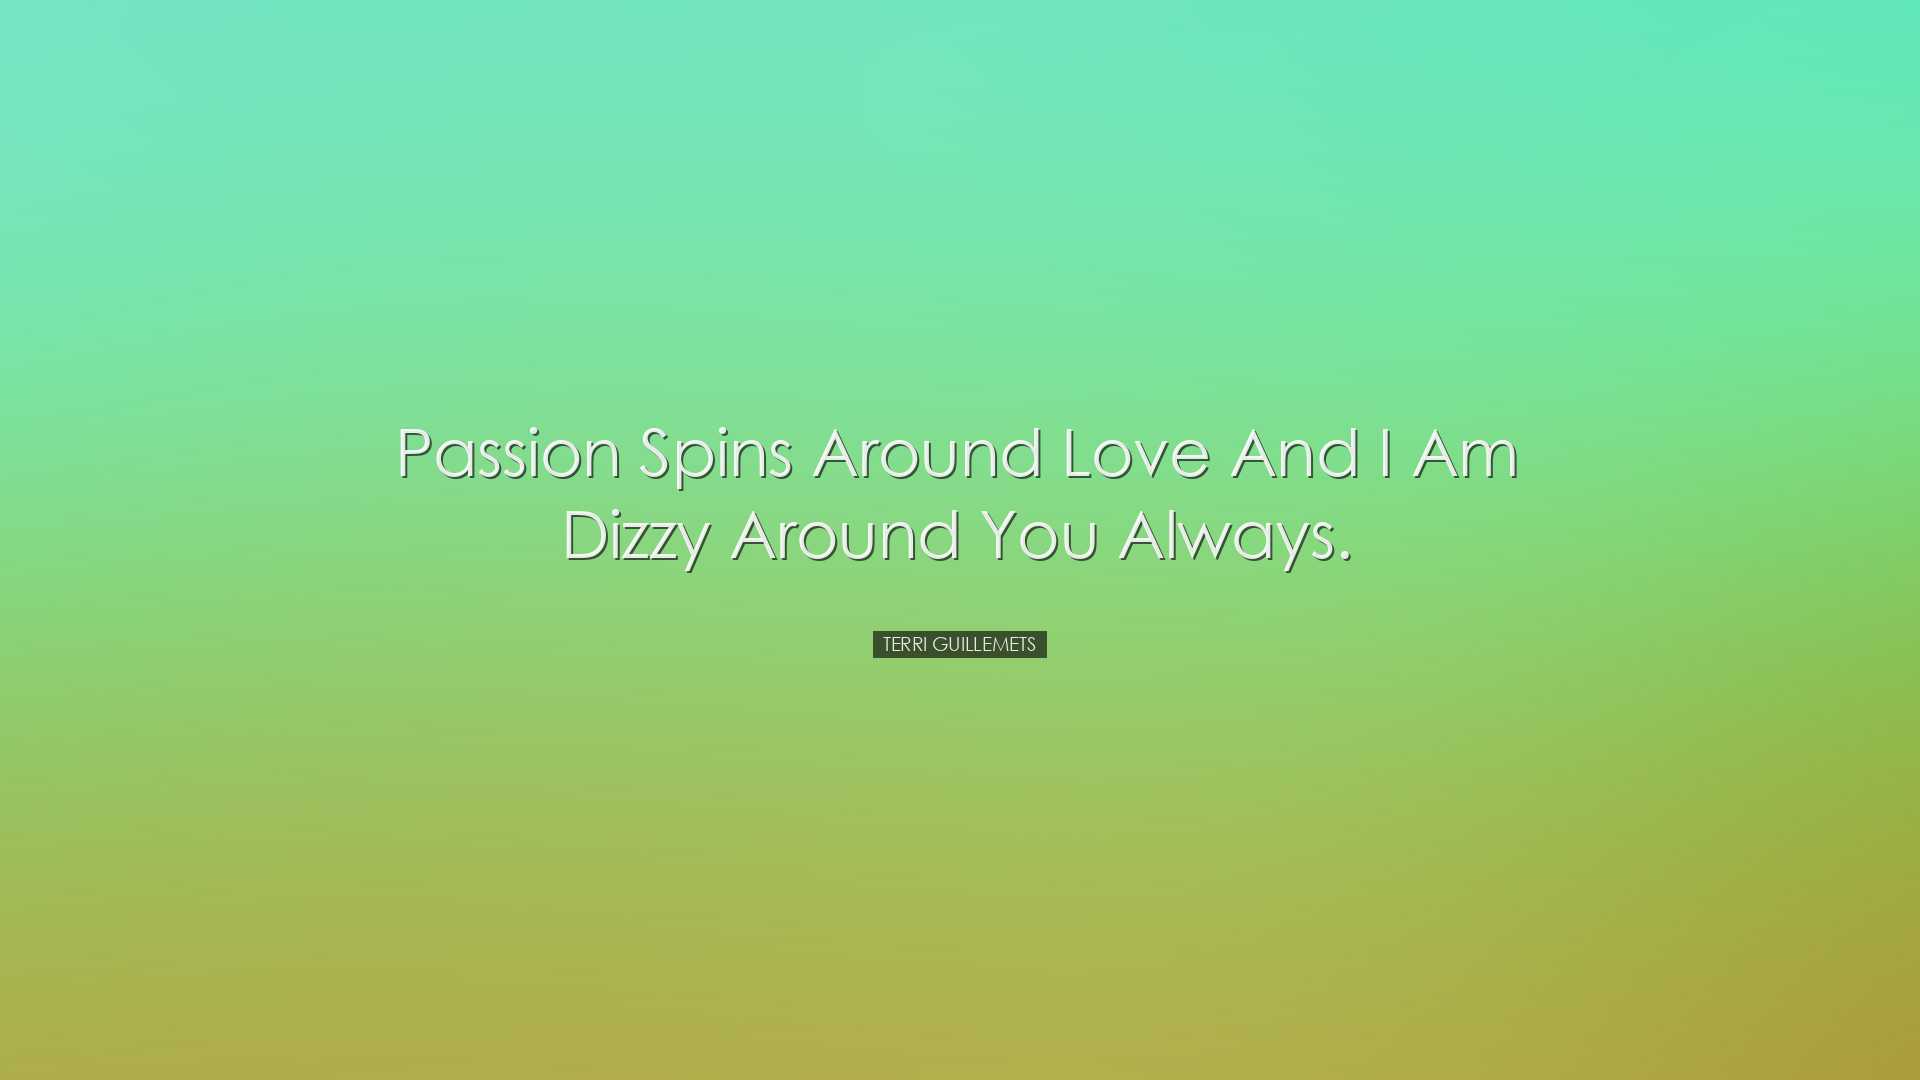 Passion spins around love and I am dizzy around you always. - Terr